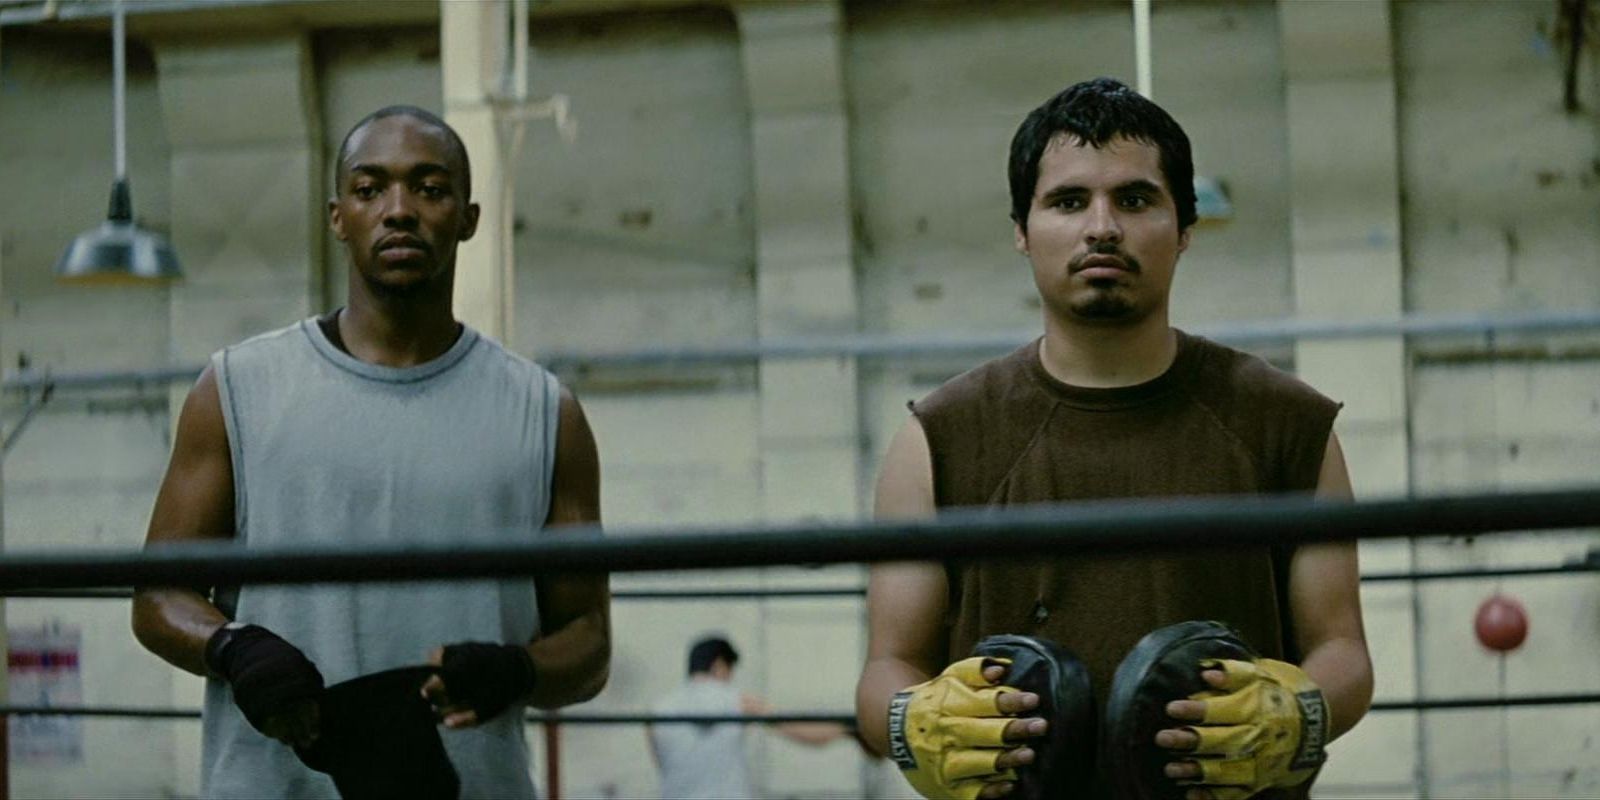 Anthony Mackie and Michael Peña in Million Dollar Baby